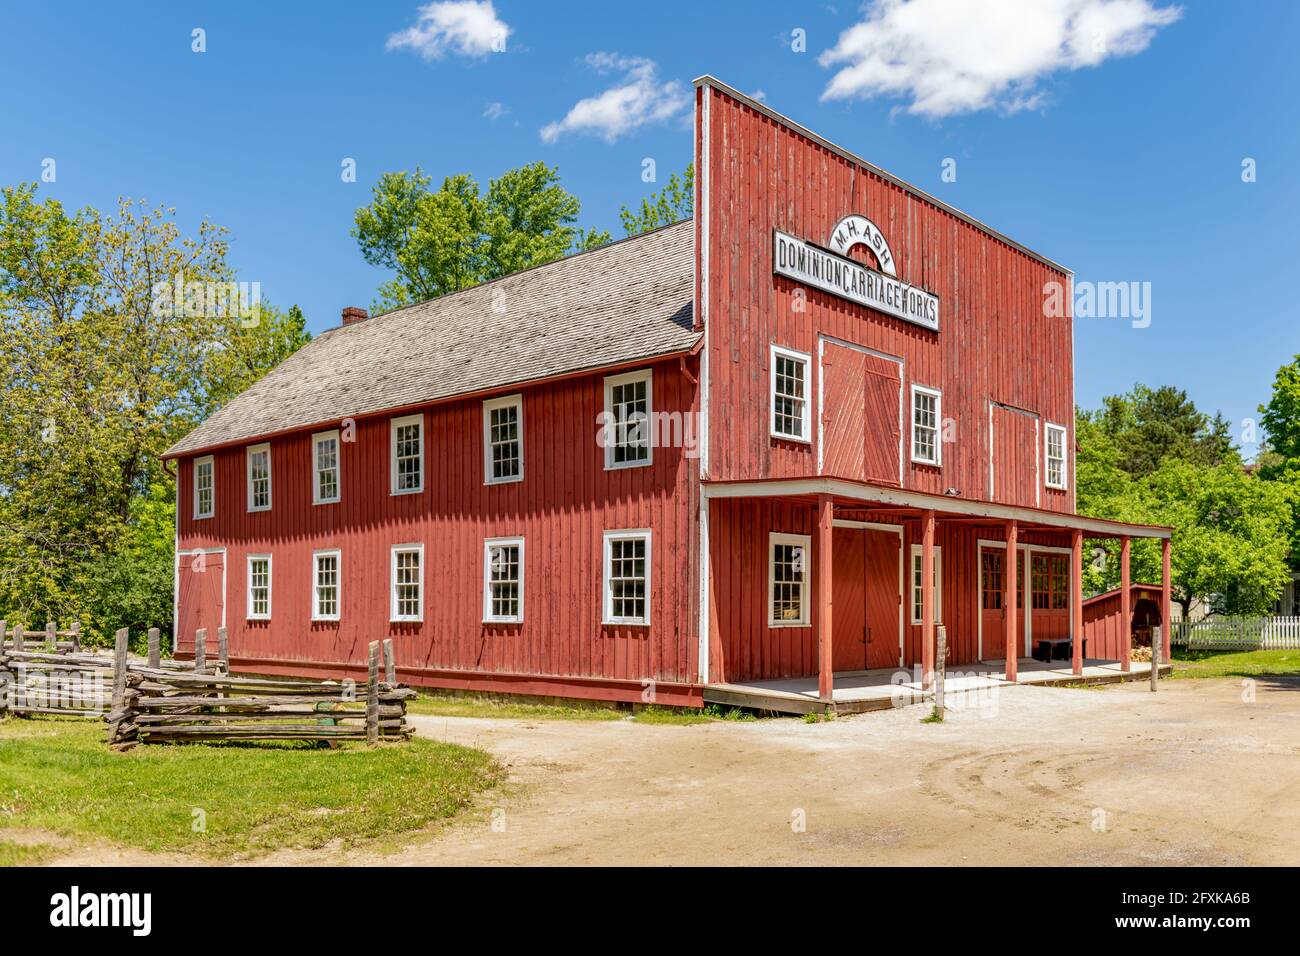 The Carriage Works building seen in Black Creek Pioneer Village which is a famous place and tourist attraction. The landmark place re-creates a countr Stock Photo